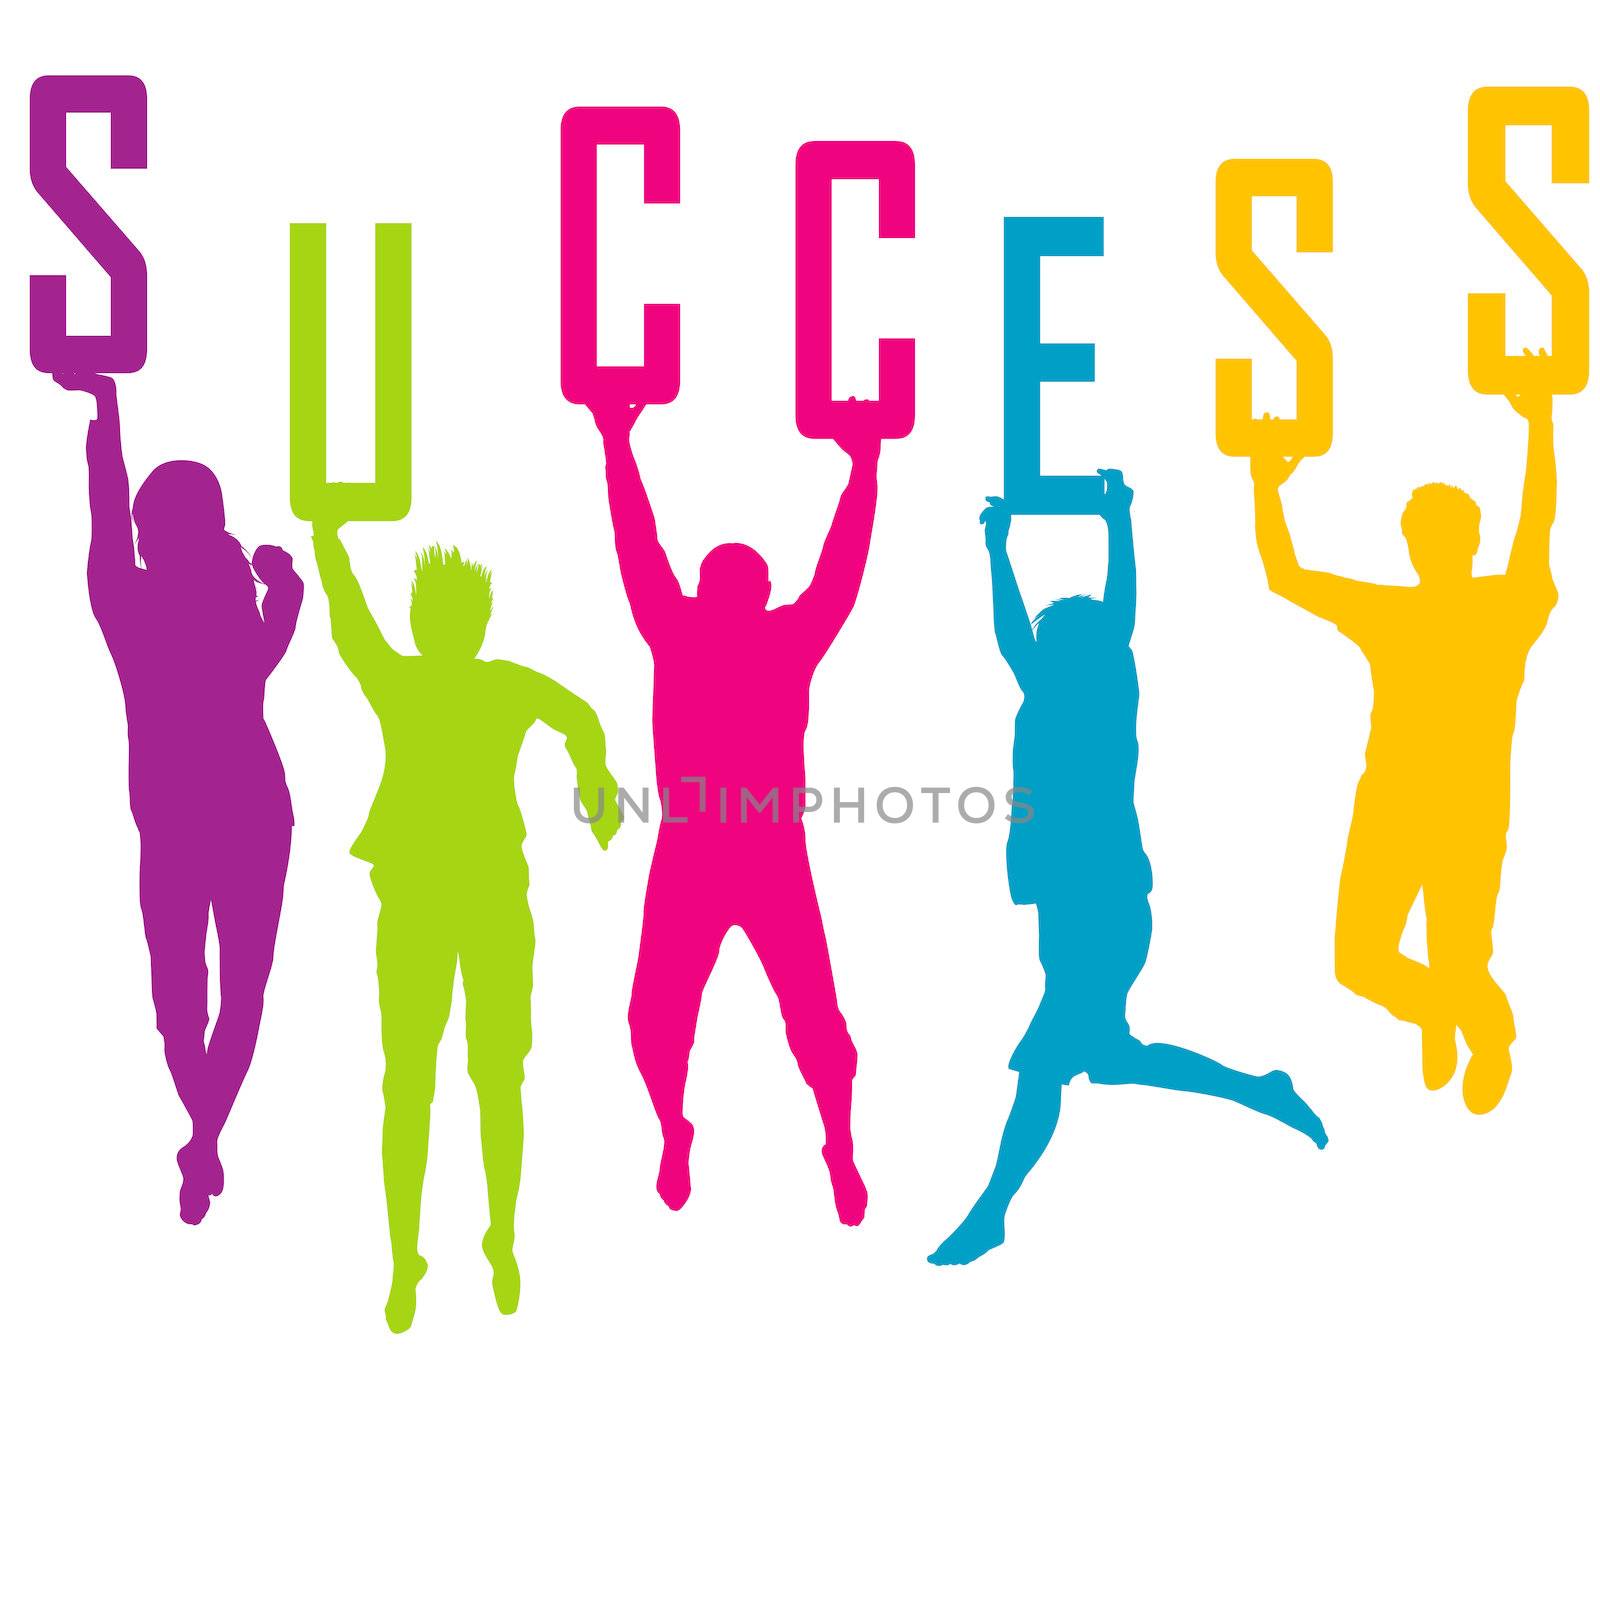 Success representation with colored people silhouettes by hibrida13